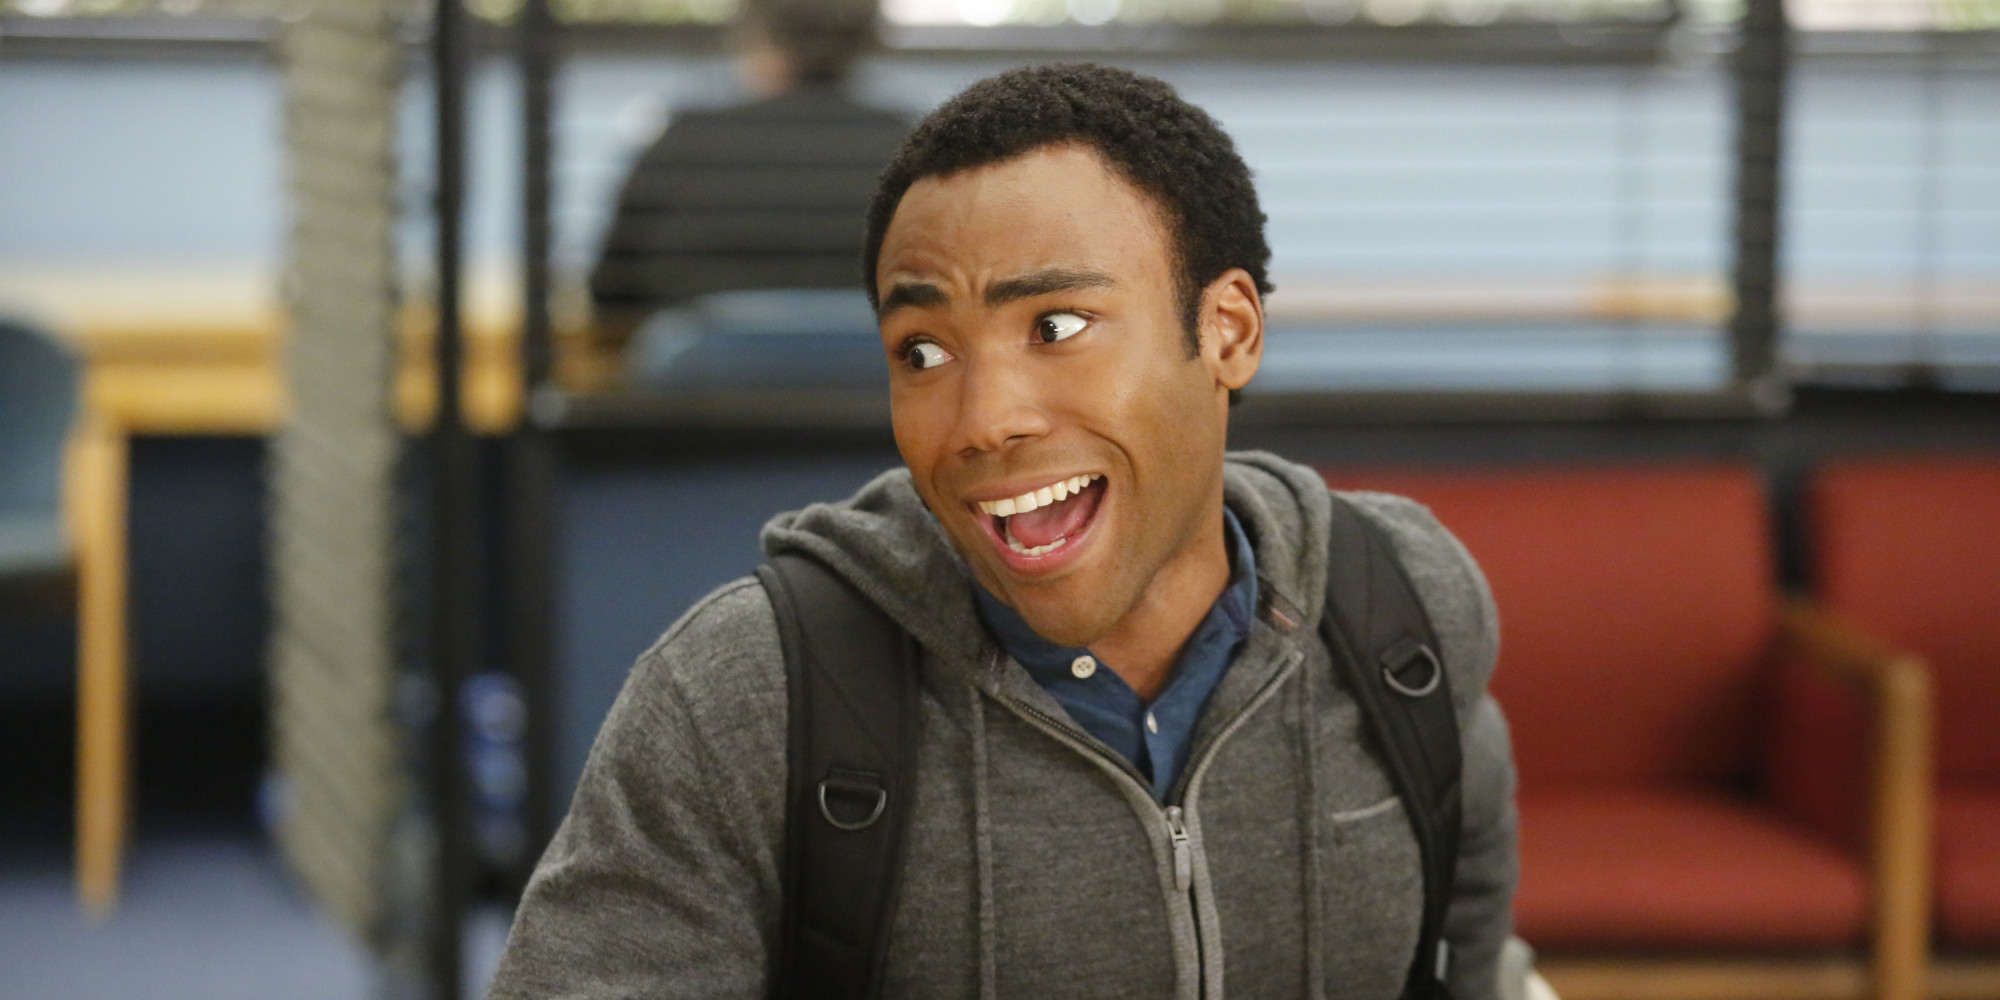 Community Why Donald Glover Skipped The Series Finale Canceled 